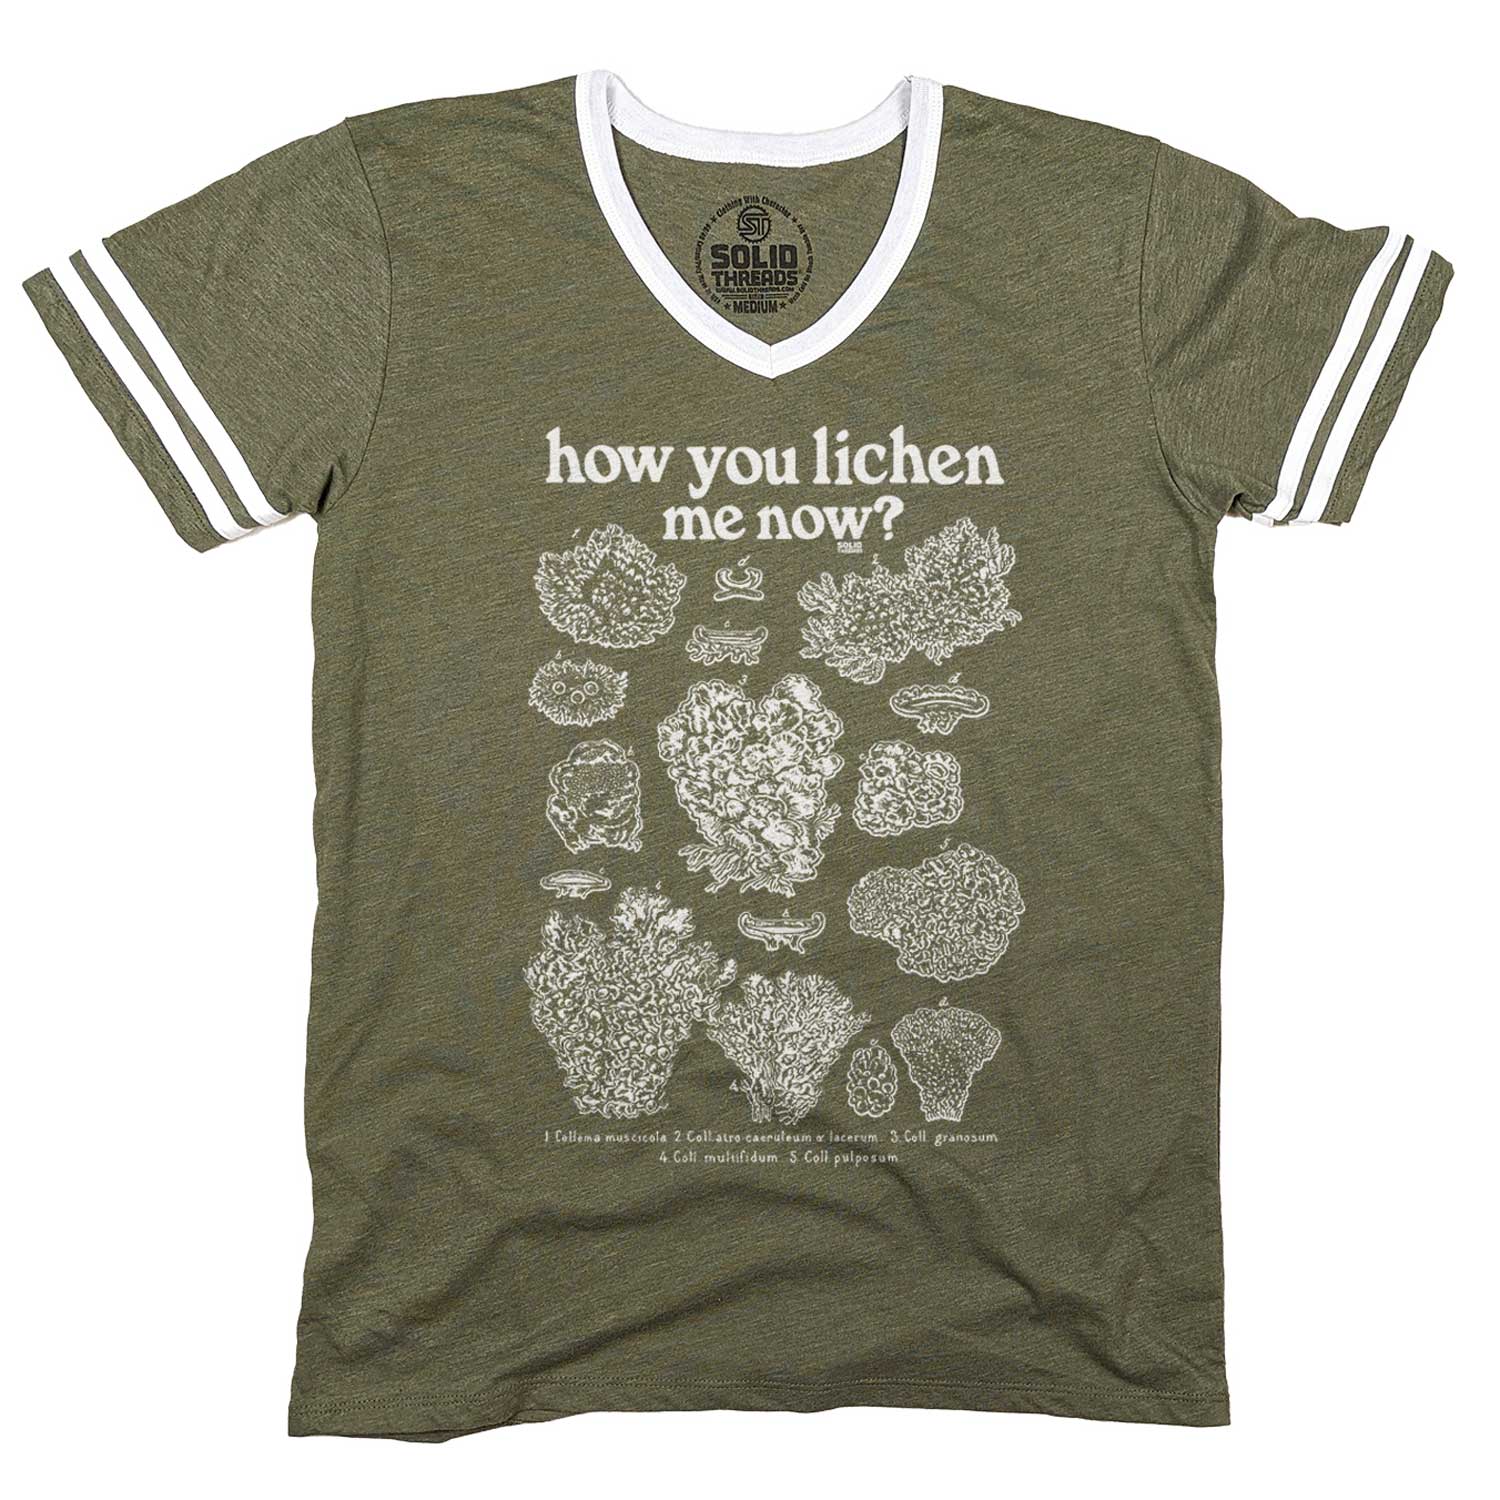 Men's How You Lichen Me Now Retro Graphic V-Neck Tee | Funny Fungi Science T-Shirt | Solid Threads